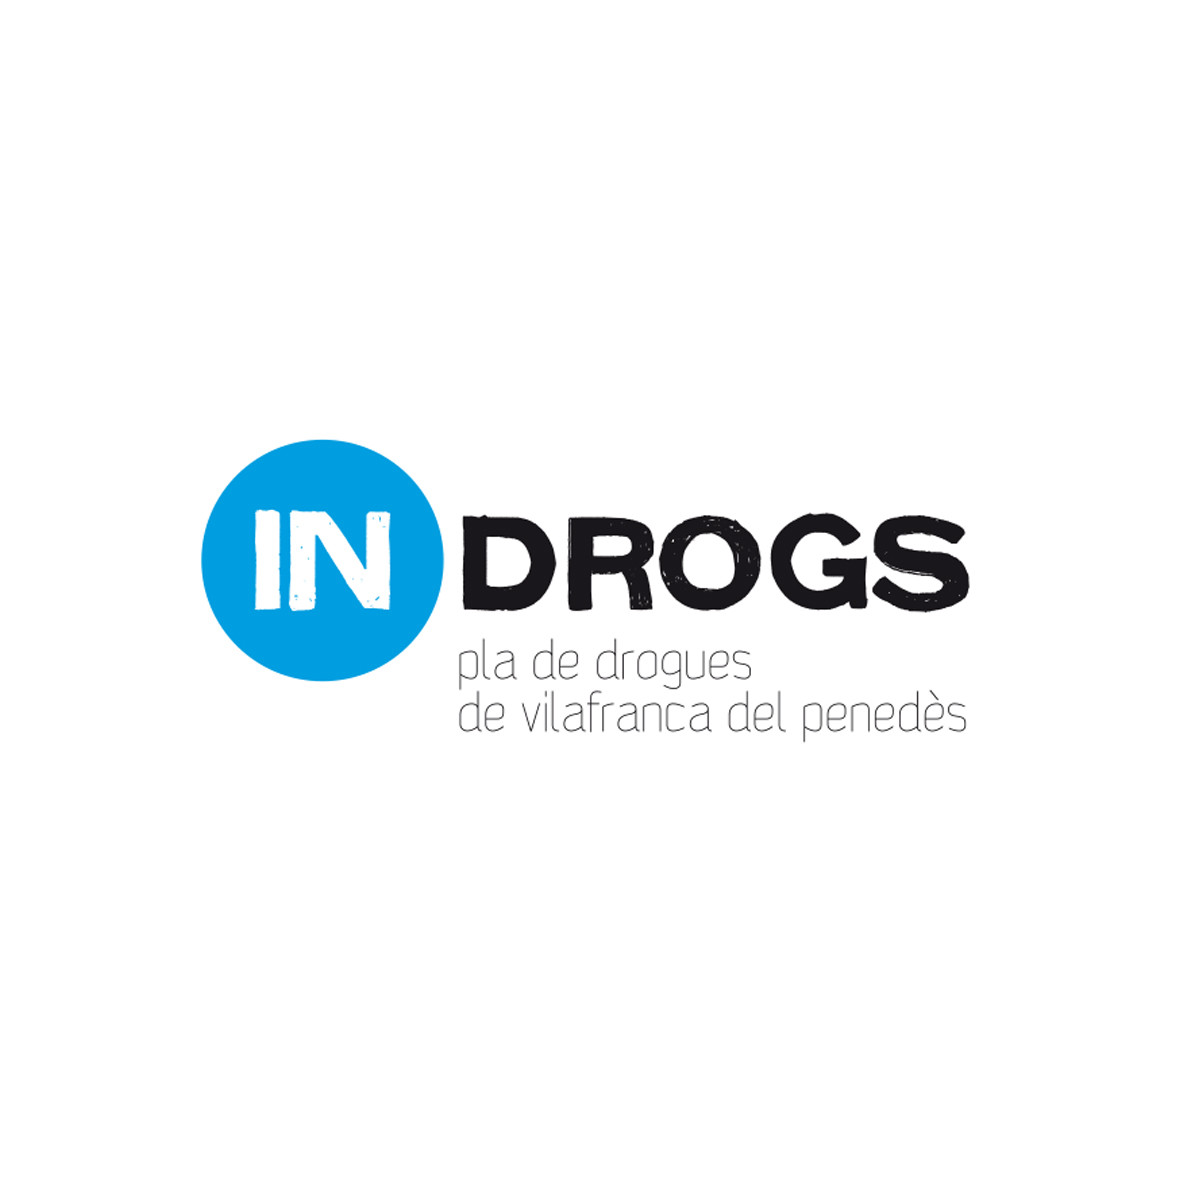 indrogs